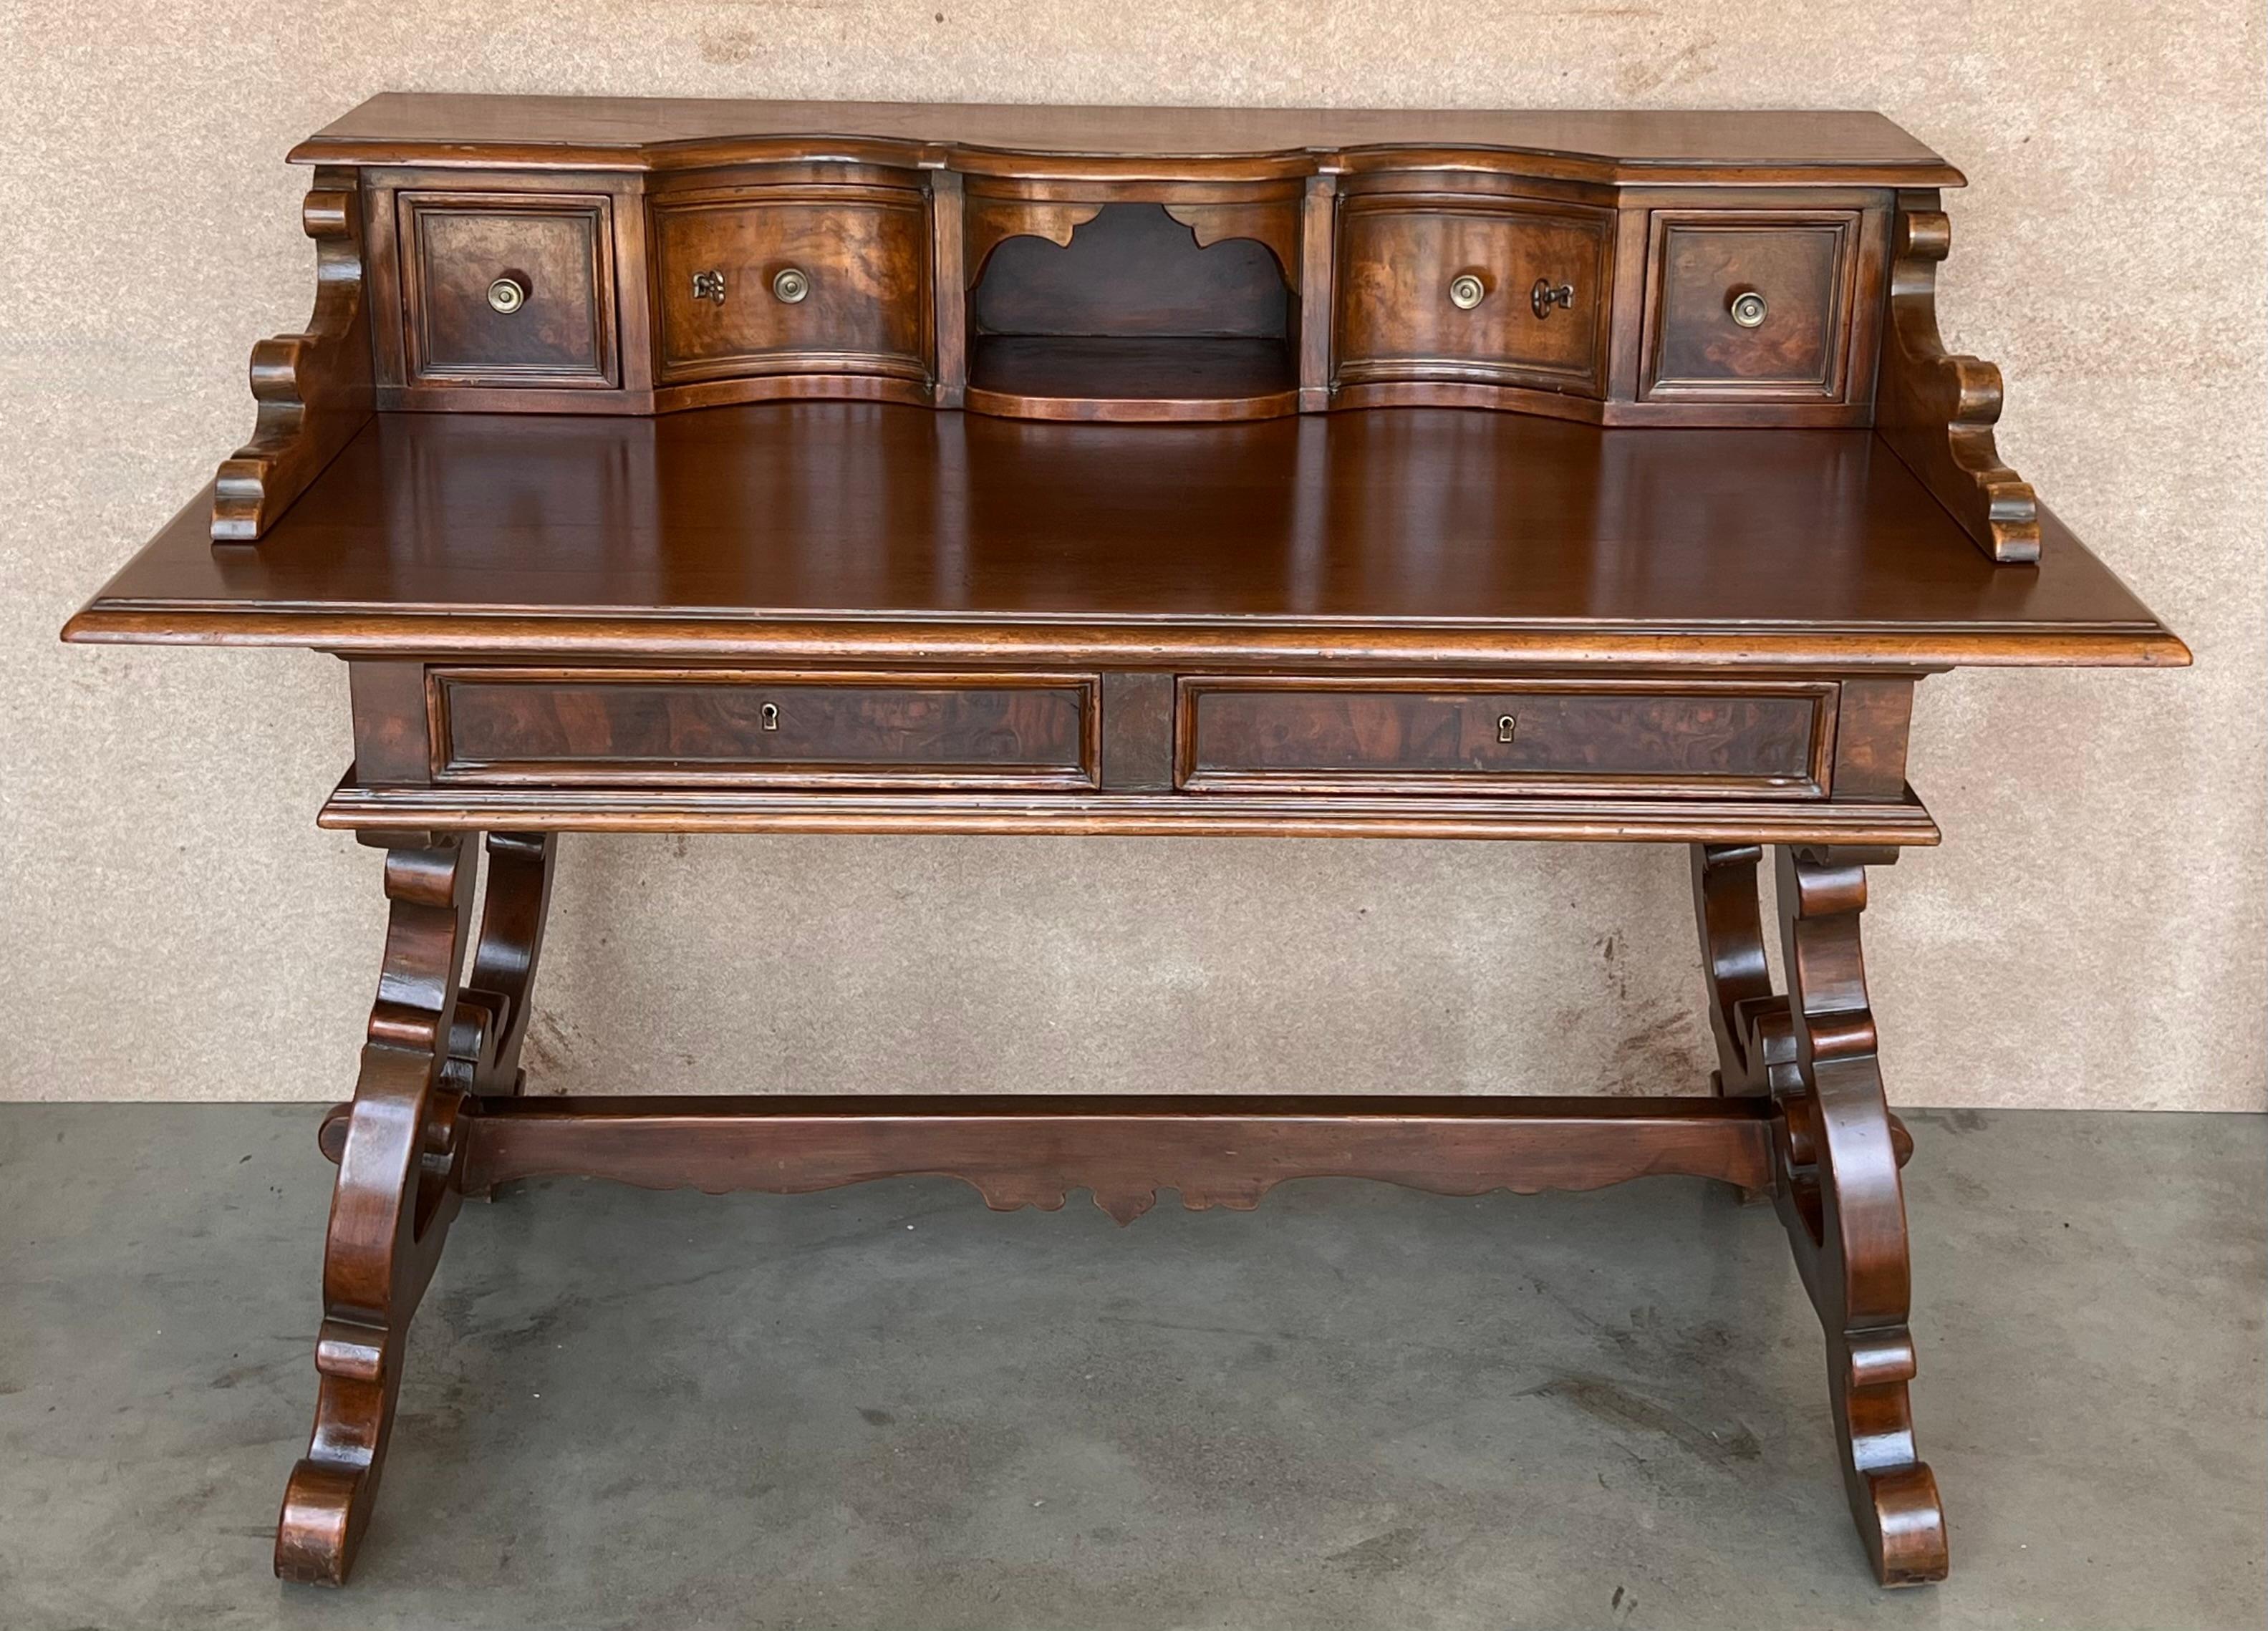 An 20th century Spanish baroque desk, or writing table made of solid walnut with lyre shaped legs joined by wood stretchers. Hand carved decoration across the front and the back. Two drawers with original iron drawer pulls. The top is made from a